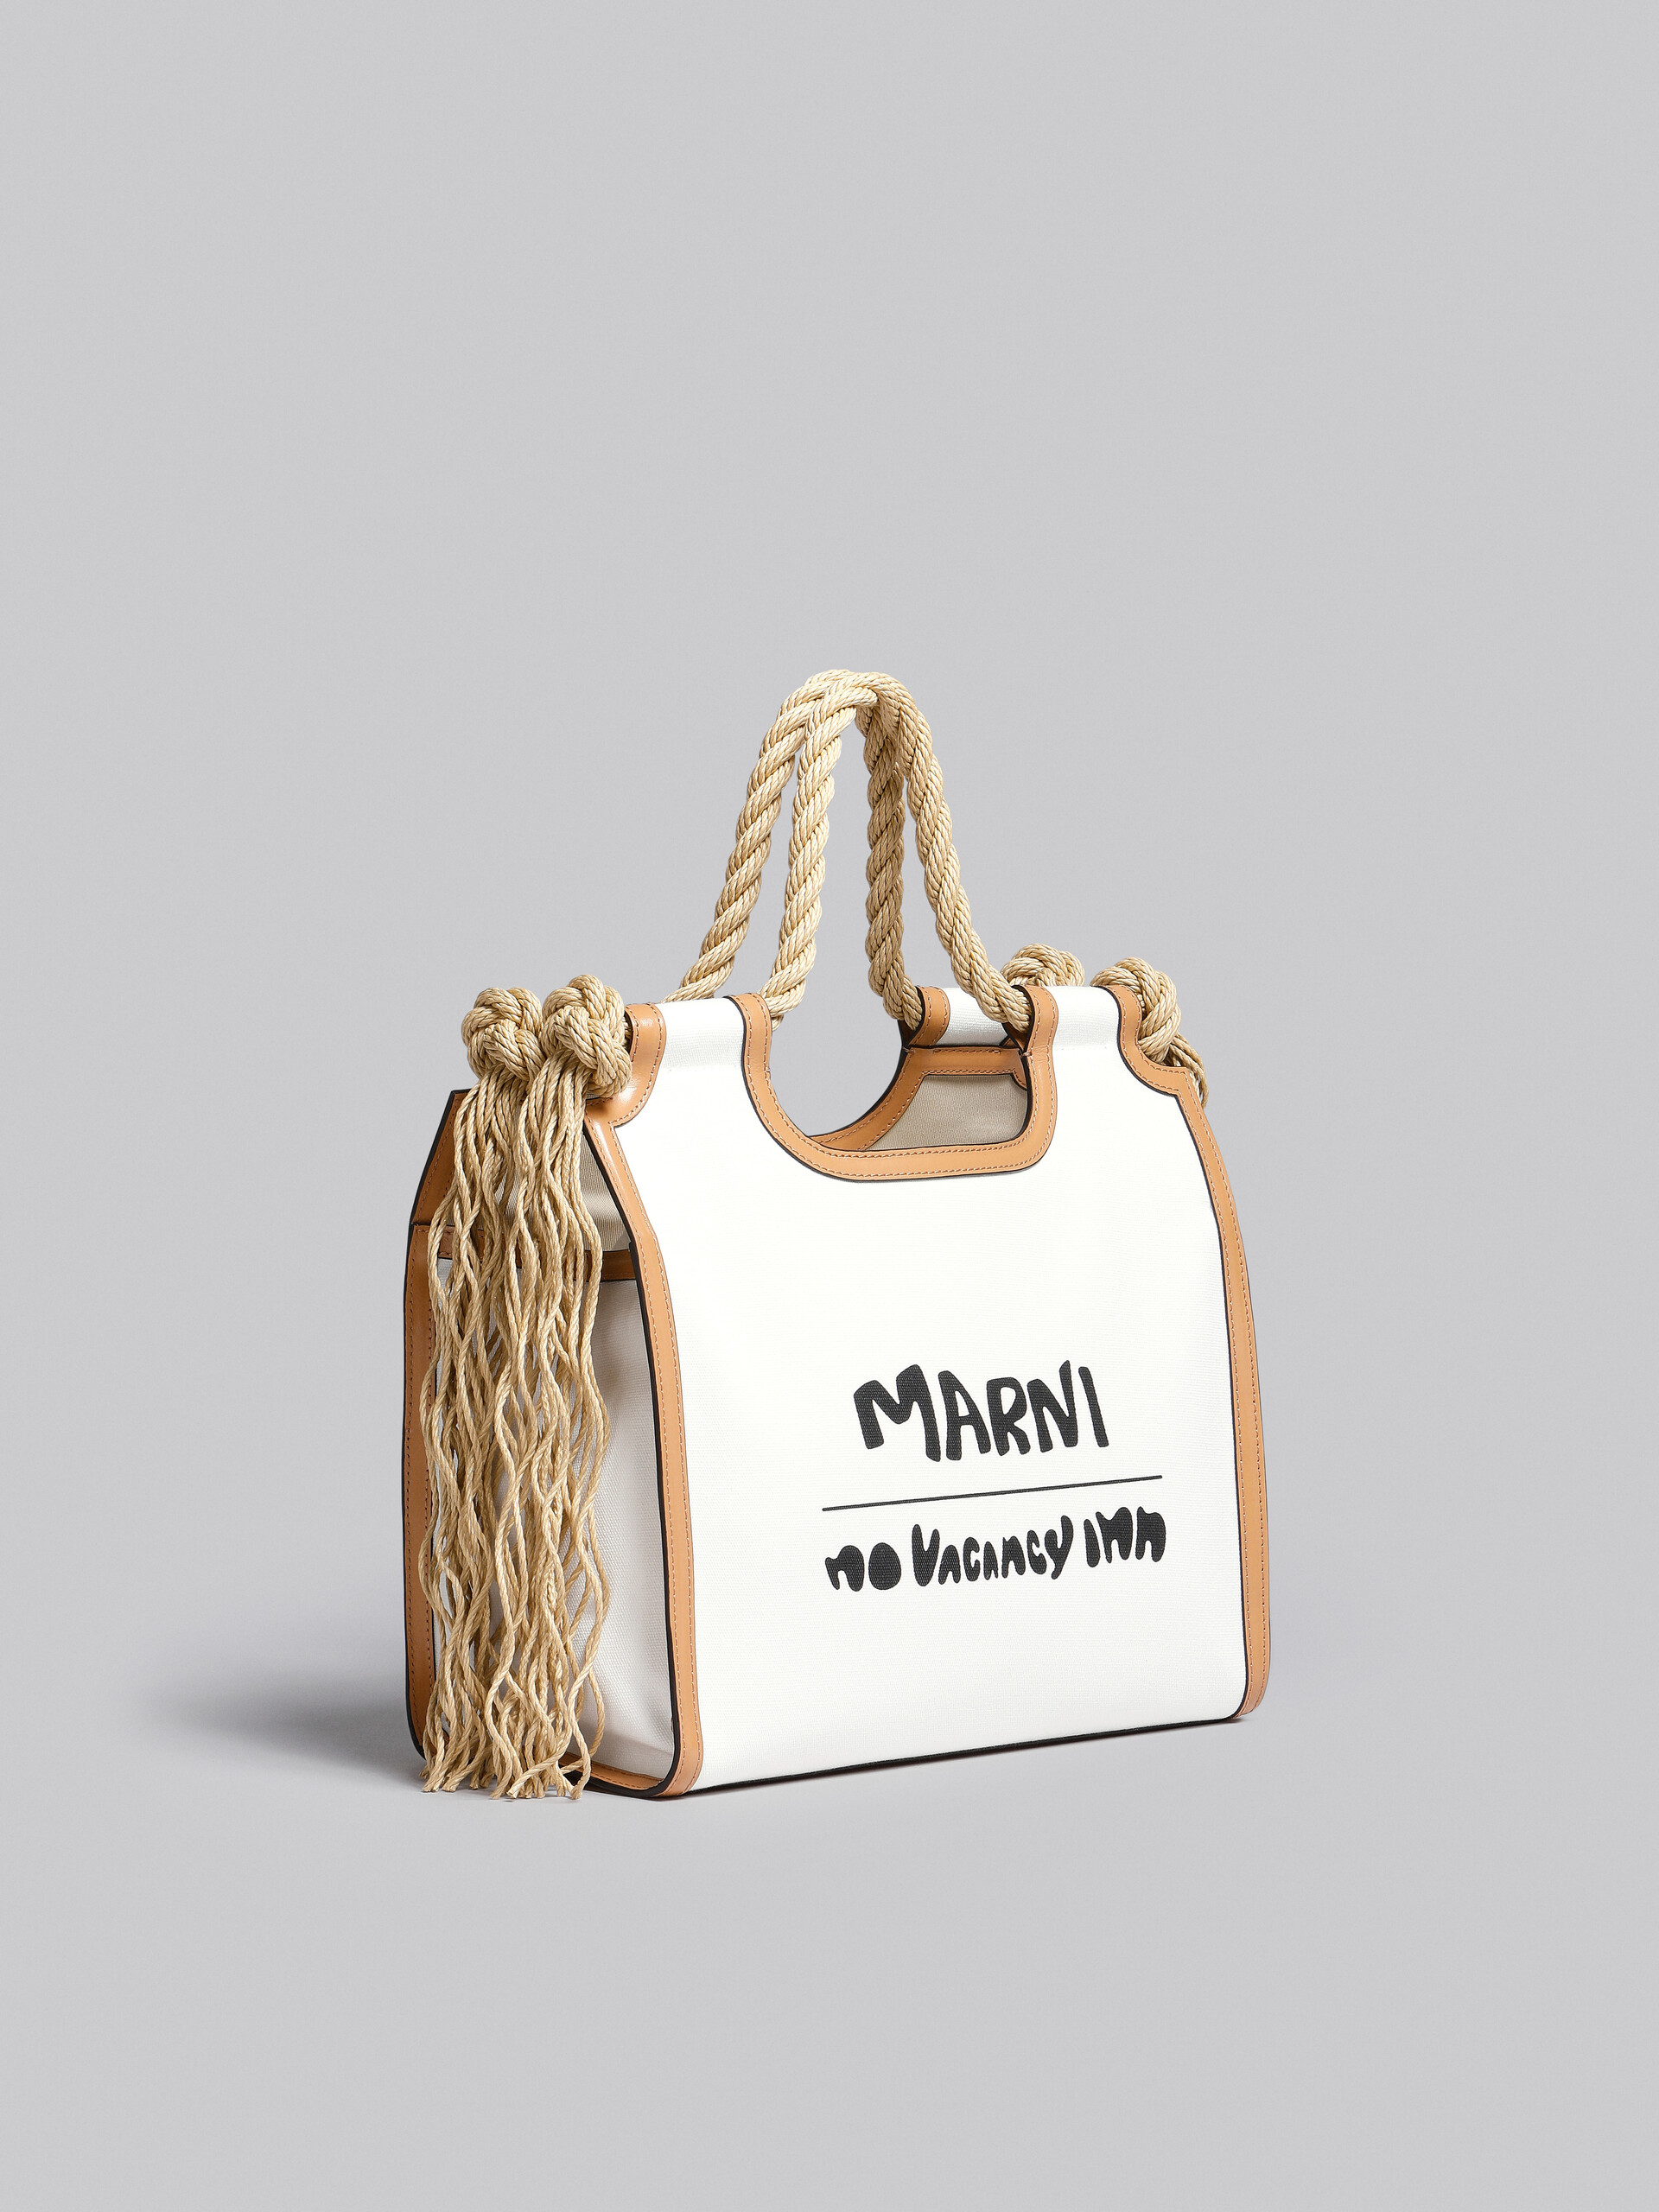 Marni x No Vacancy Inn - Marcel Tote Bag in white canvas with beige trims - Handbag - Image 6